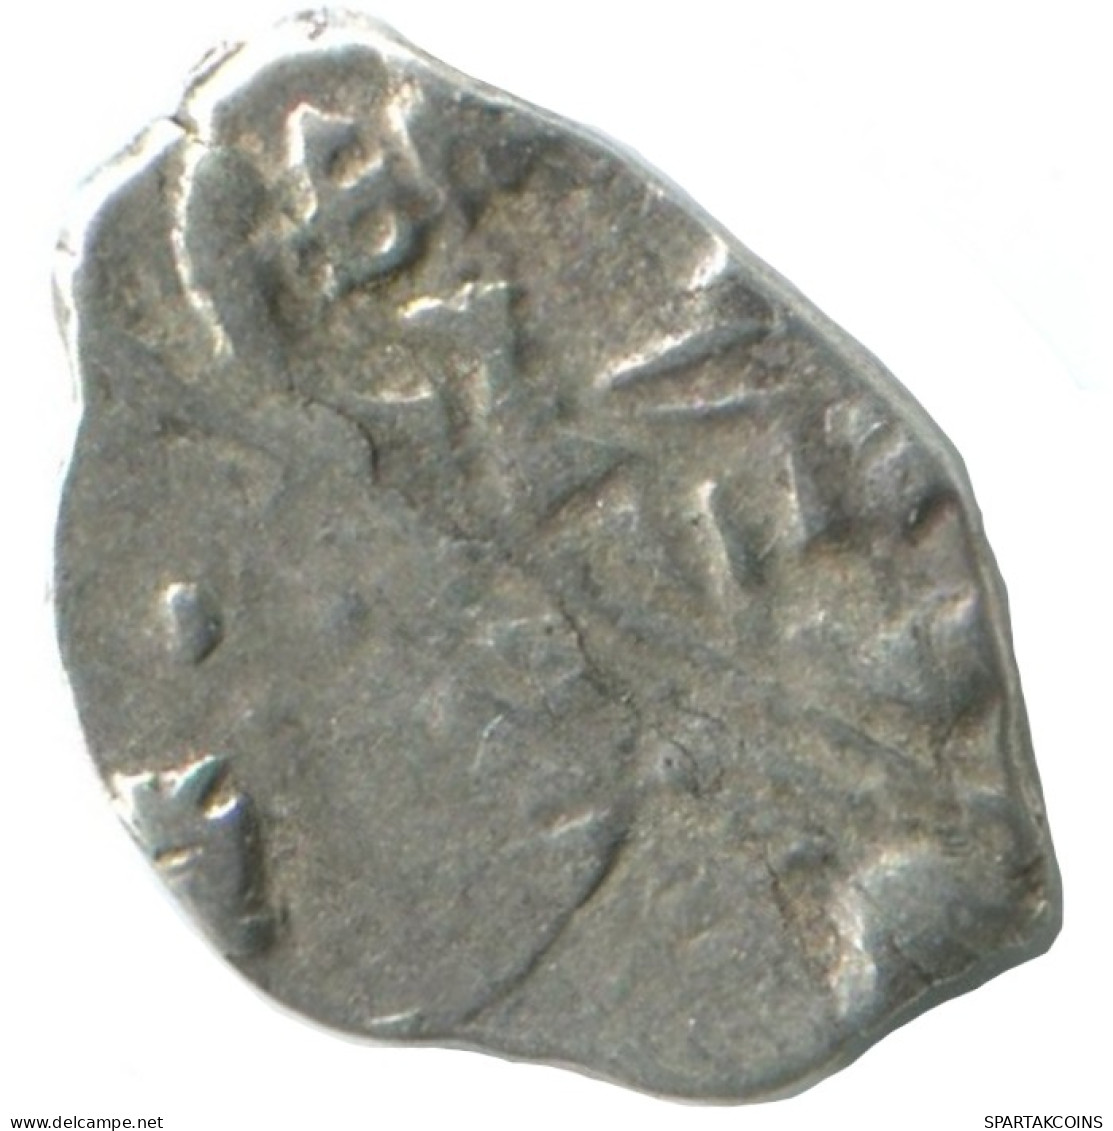 RUSIA RUSSIA 1702 KOPECK PETER I OLD Mint MOSCOW PLATA 0.4g/8mm #AB506.10.E.A - Russia